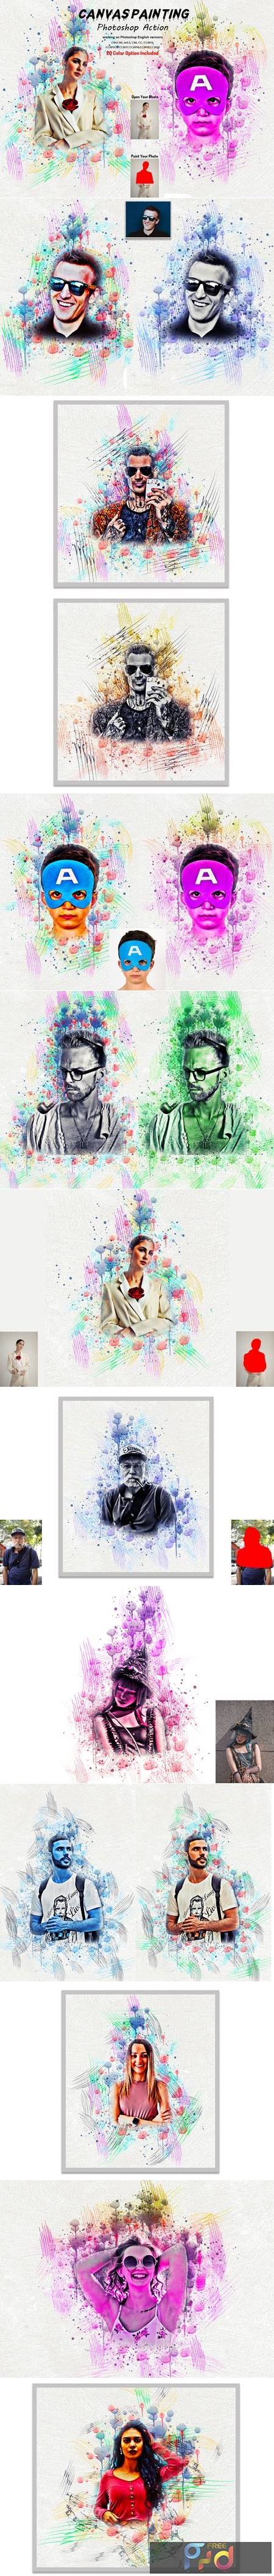 Canvas Painting Photoshop Action 5804650 1